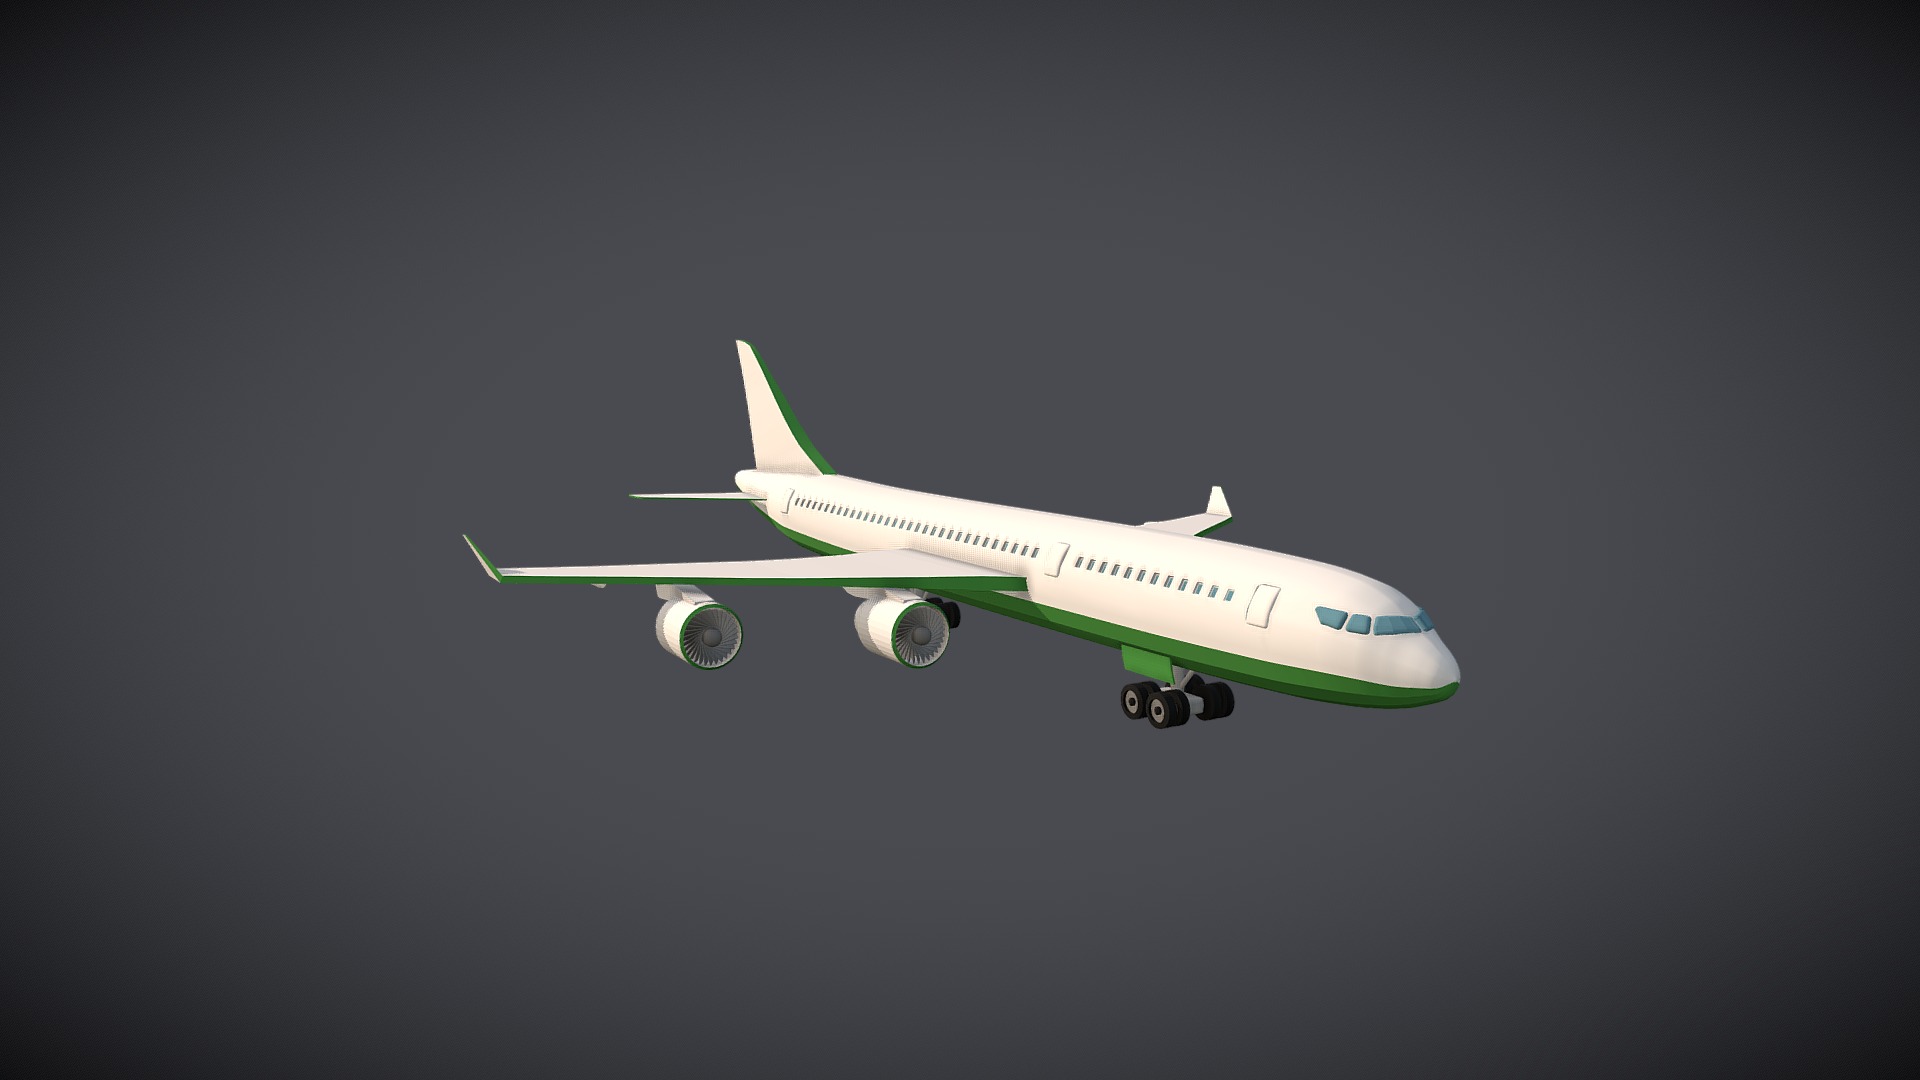 3D model Low-Poly Green Landed Airplane - This is a 3D model of the Low-Poly Green Landed Airplane. The 3D model is about a large airplane flying in the sky.